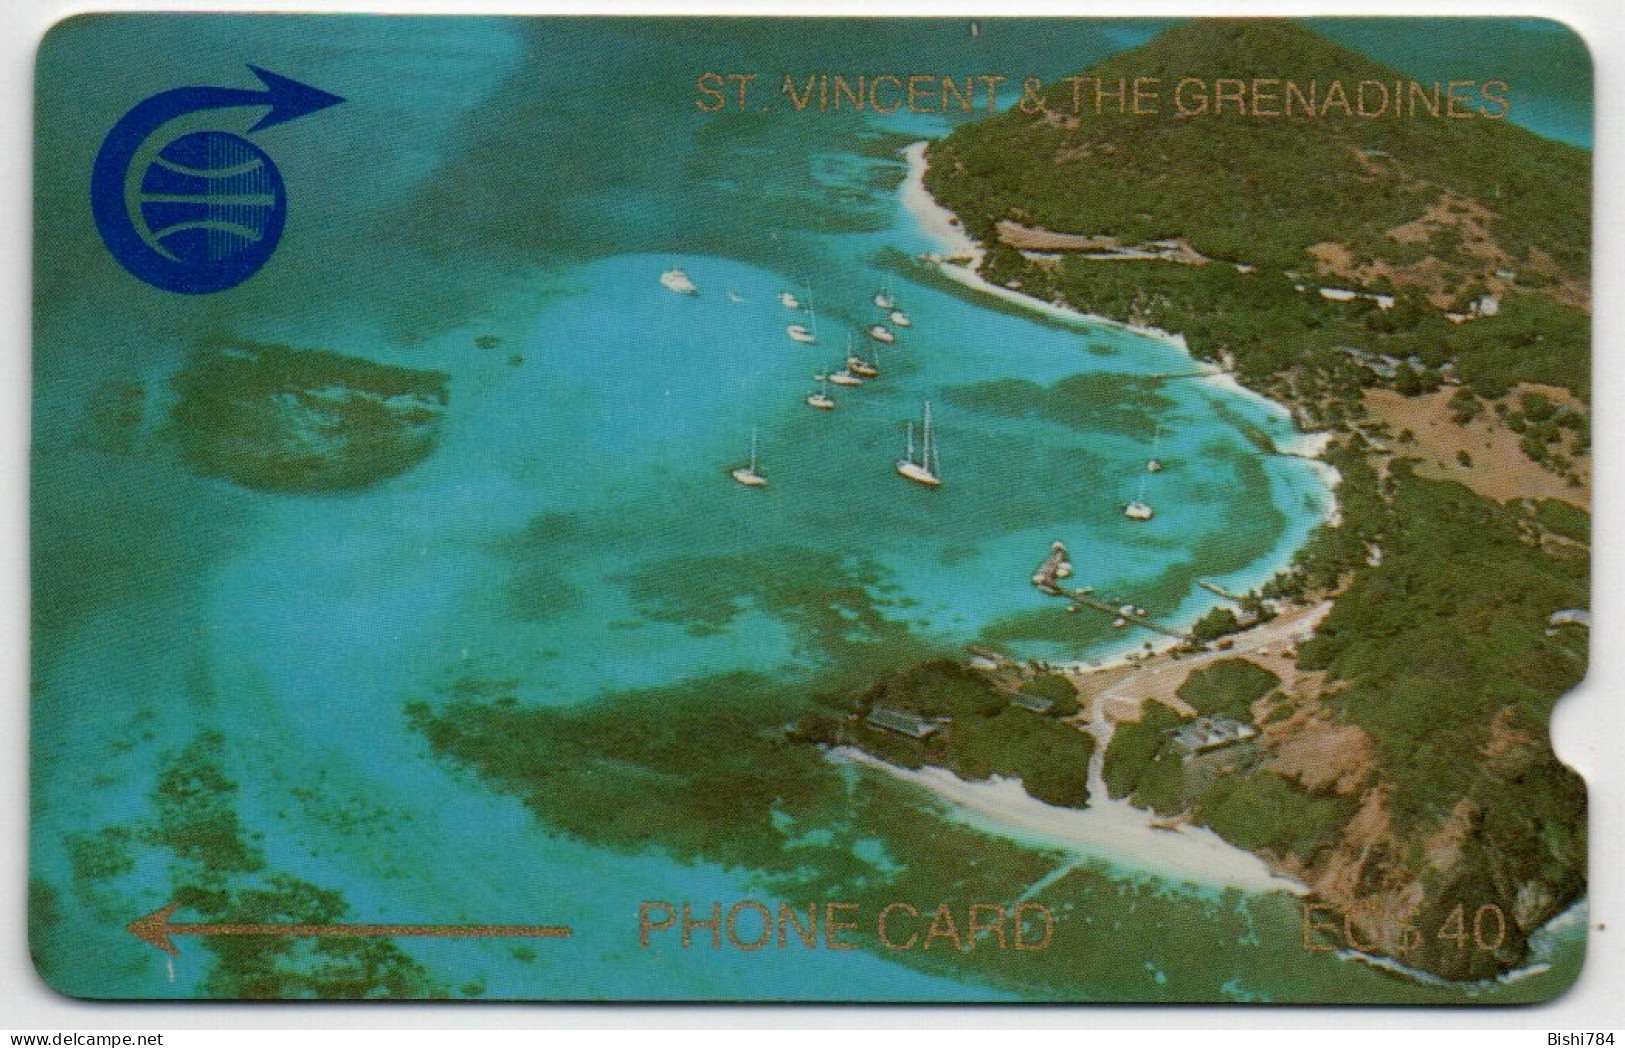 St. Vincent & The Grenadines - Admiralty Bay $40 (Deep Notch) - 1CSVD - St. Vincent & The Grenadines